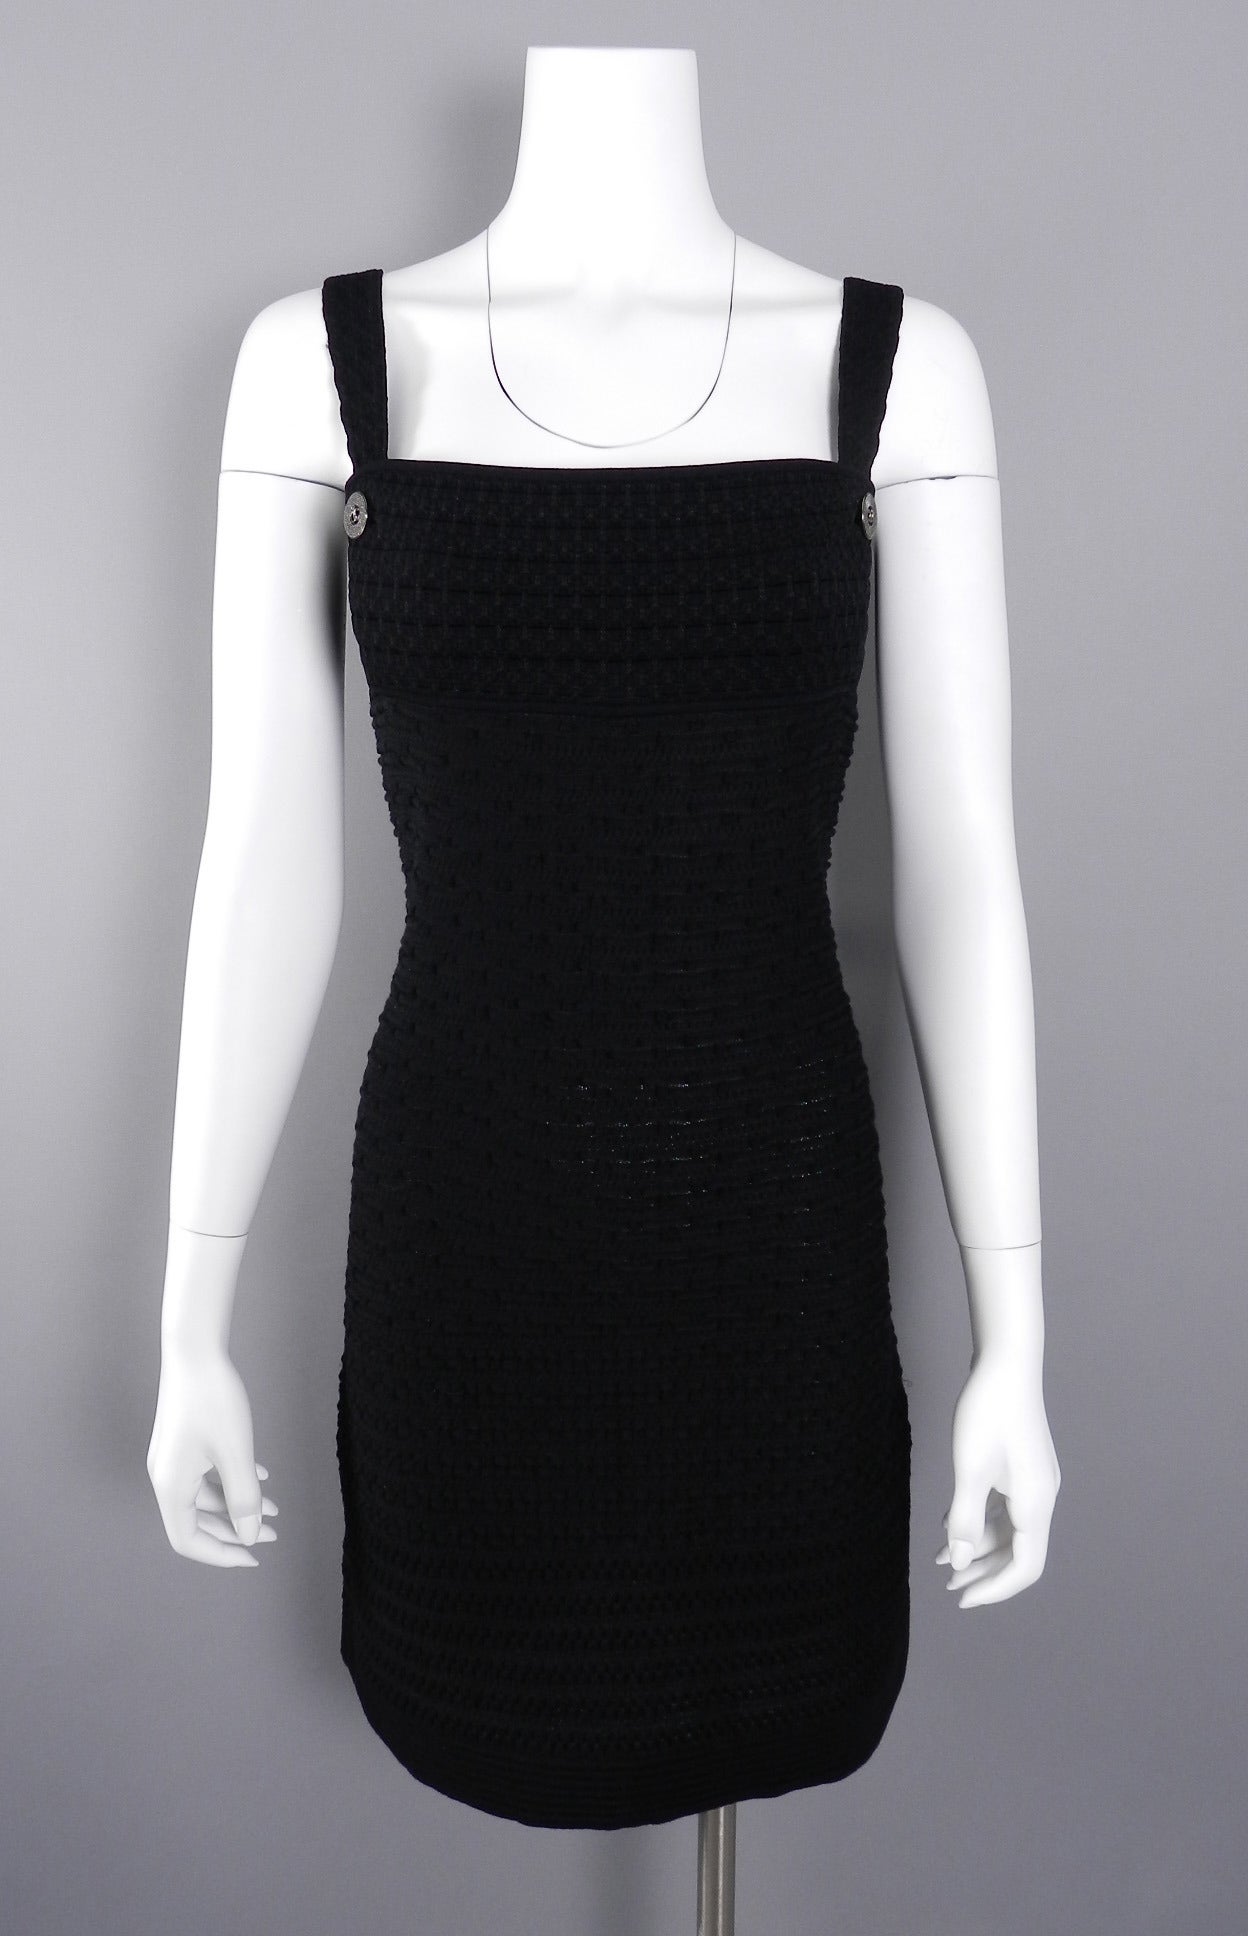 Chanel Black Textured Stretch Jersey Dress with Back Zipper 4